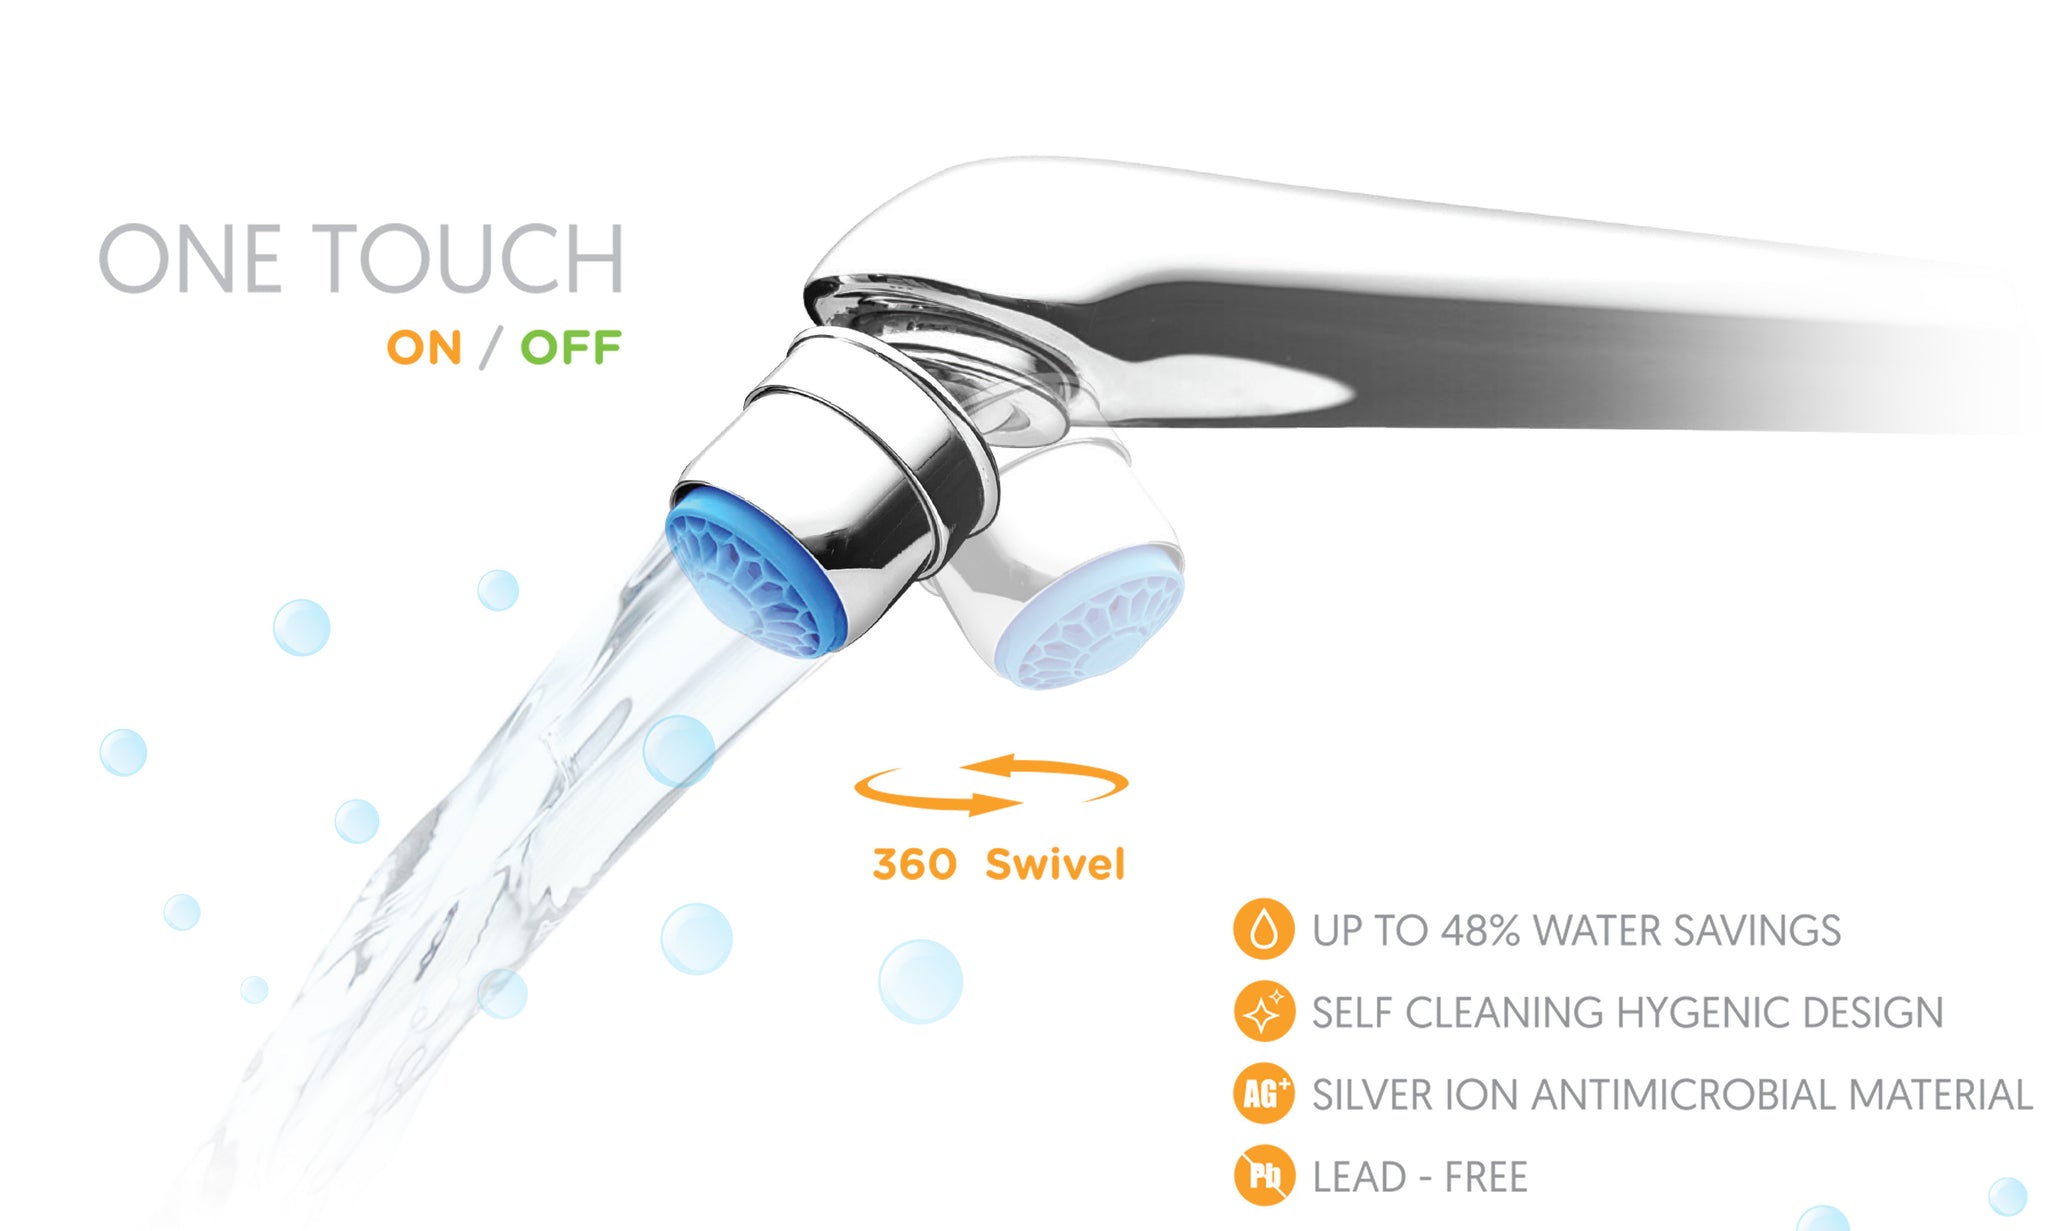 One Touch Faucet Extender - Plus